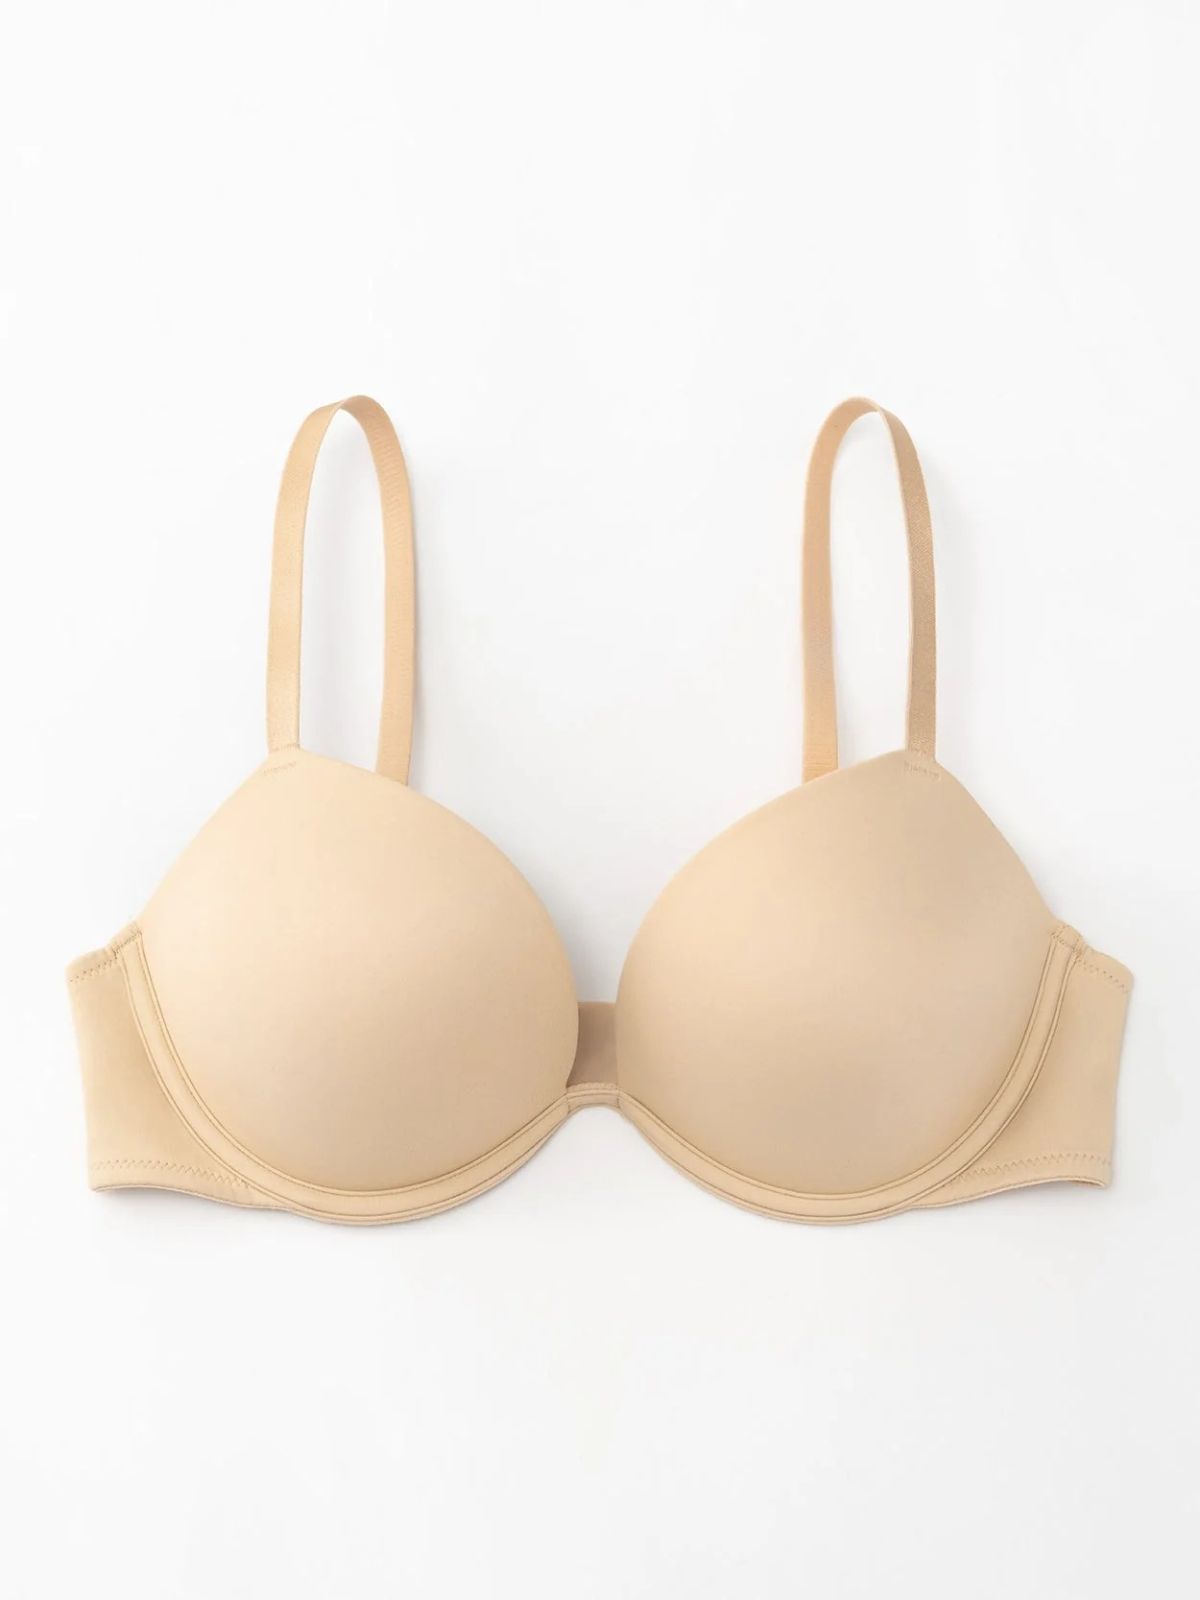 What are the differences between underwire, wireless, push-up